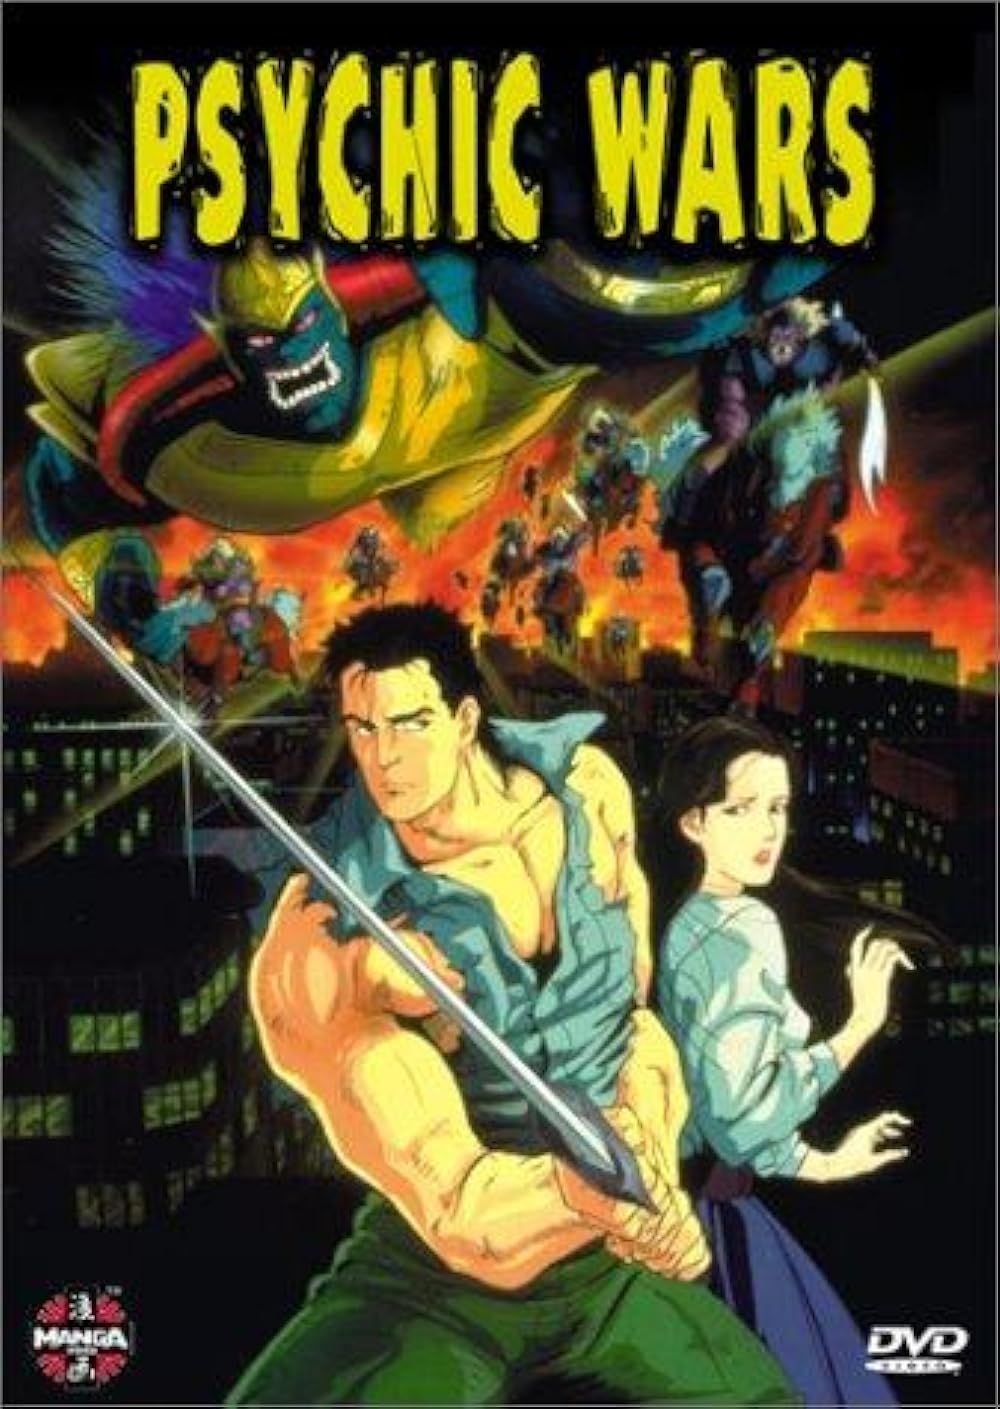 Psychic Wars DVD cover with the main character wielding a sword